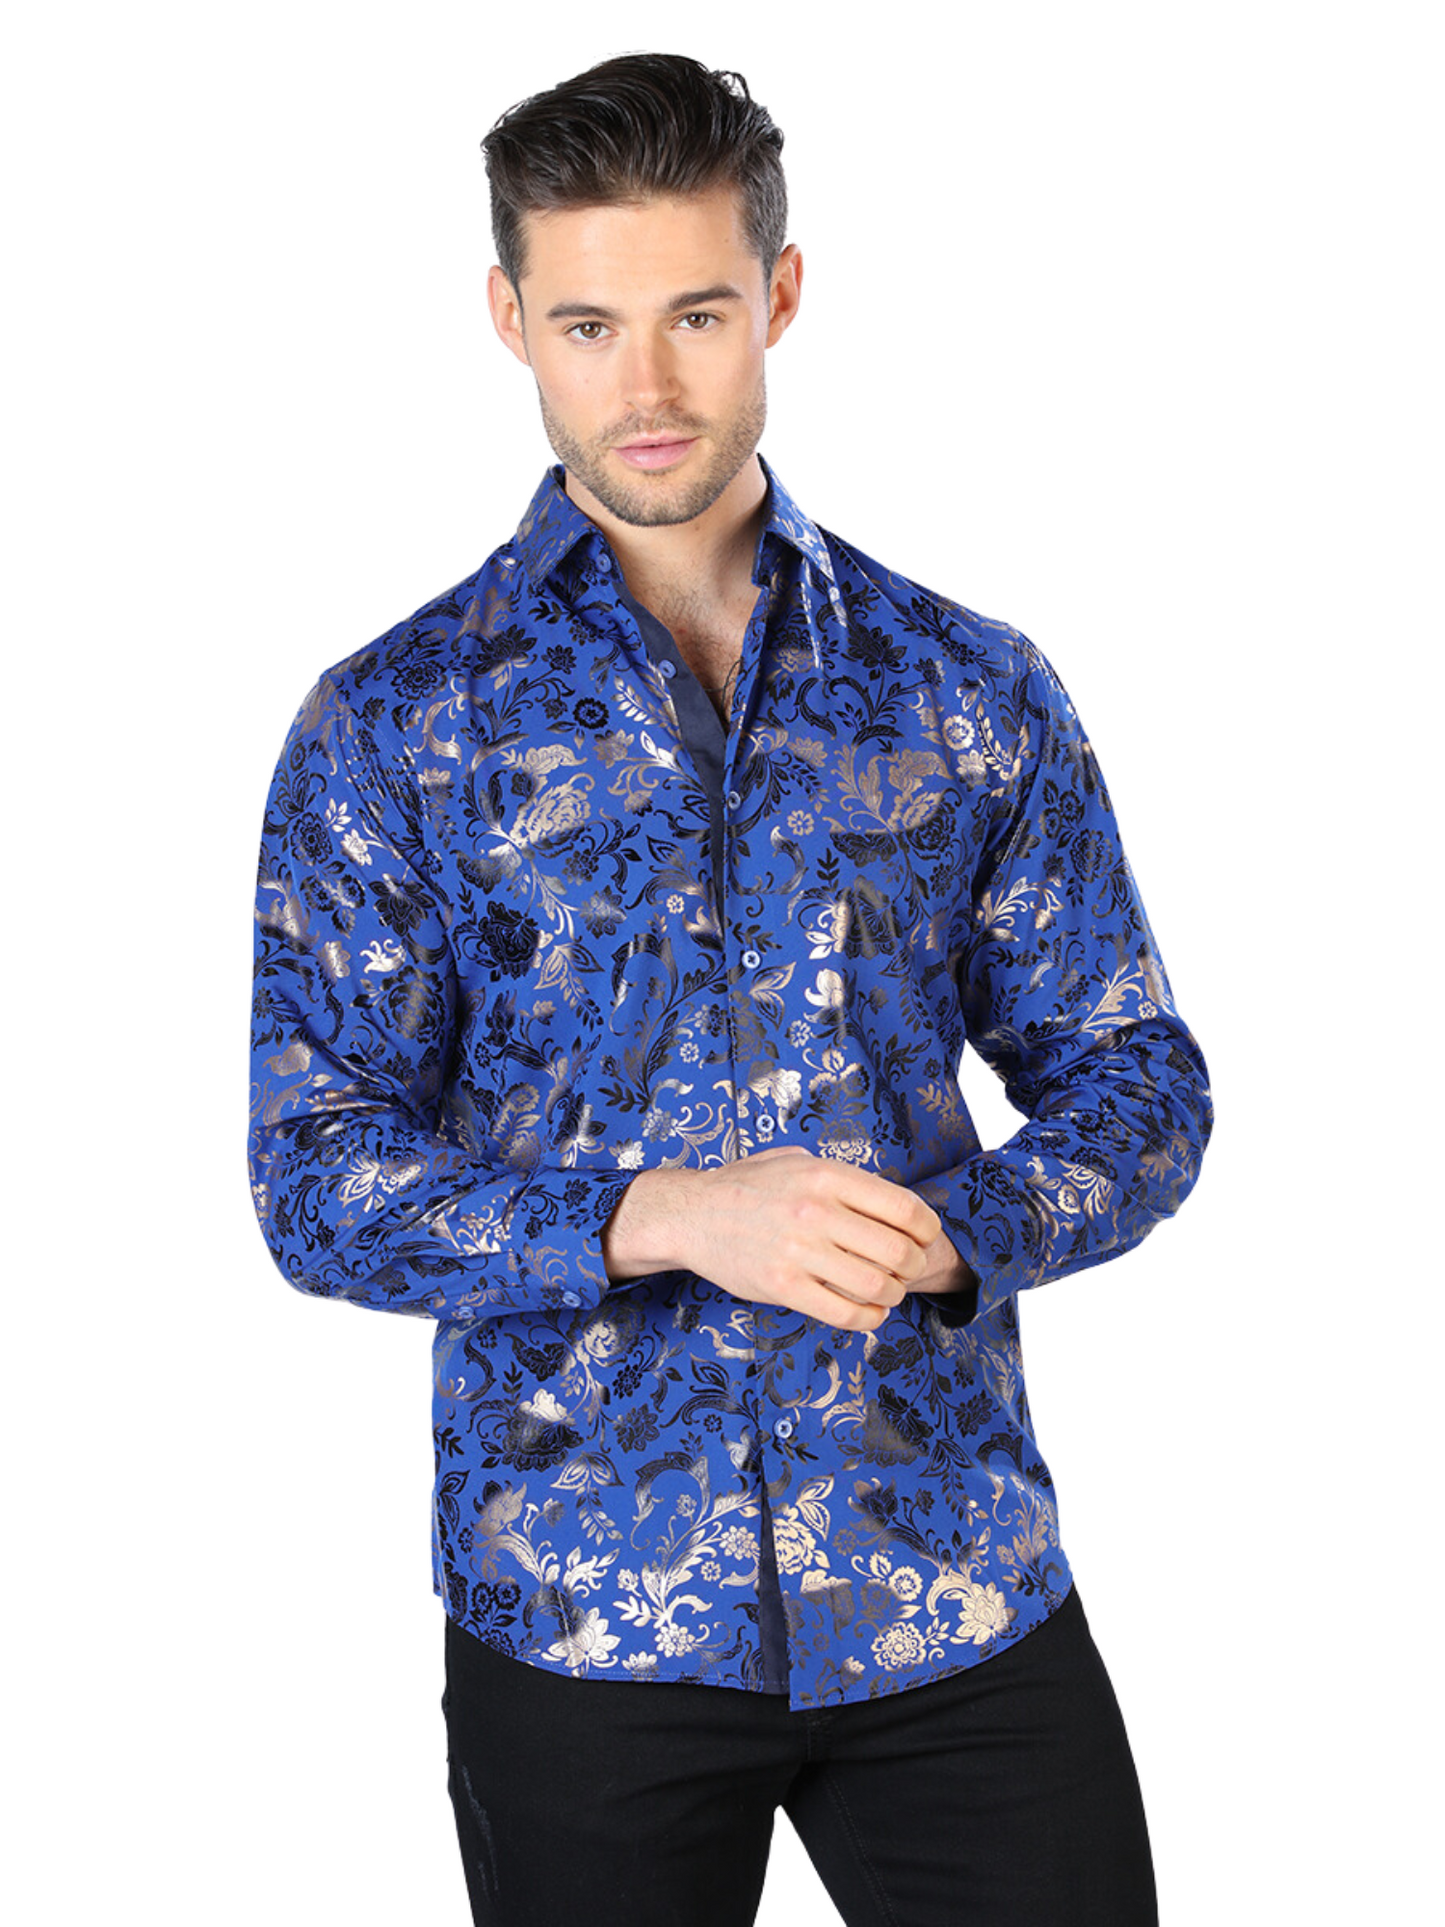 Blue/Gold Printed Long Sleeve Casual Shirt for Men 'The Lord of the Skies' - ID: 44029 Casual Shirt The Lord of the Skies Blue/Gold